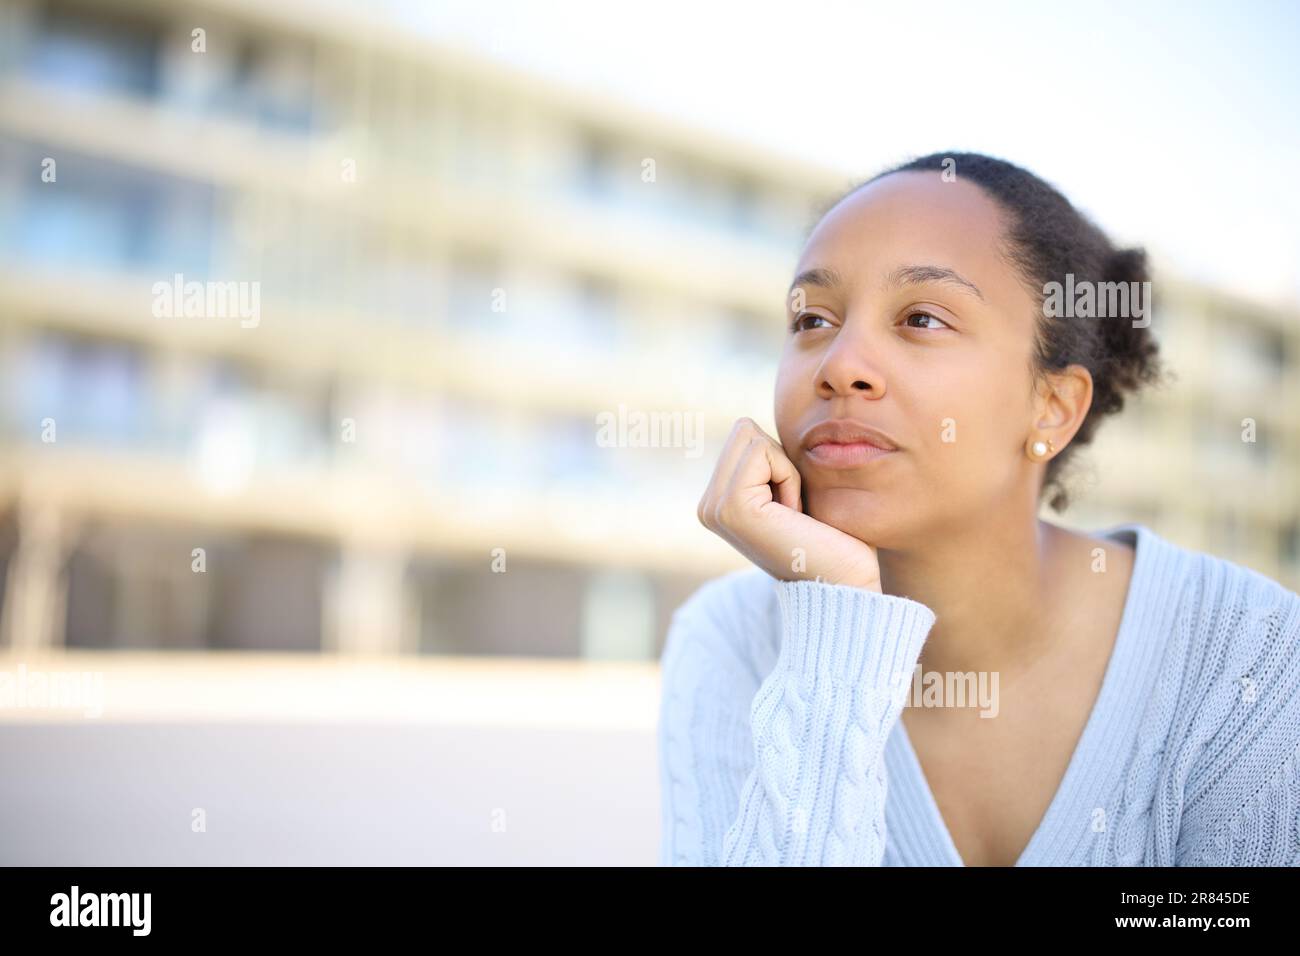 Black woman thinking looking away in the street Stock Photo